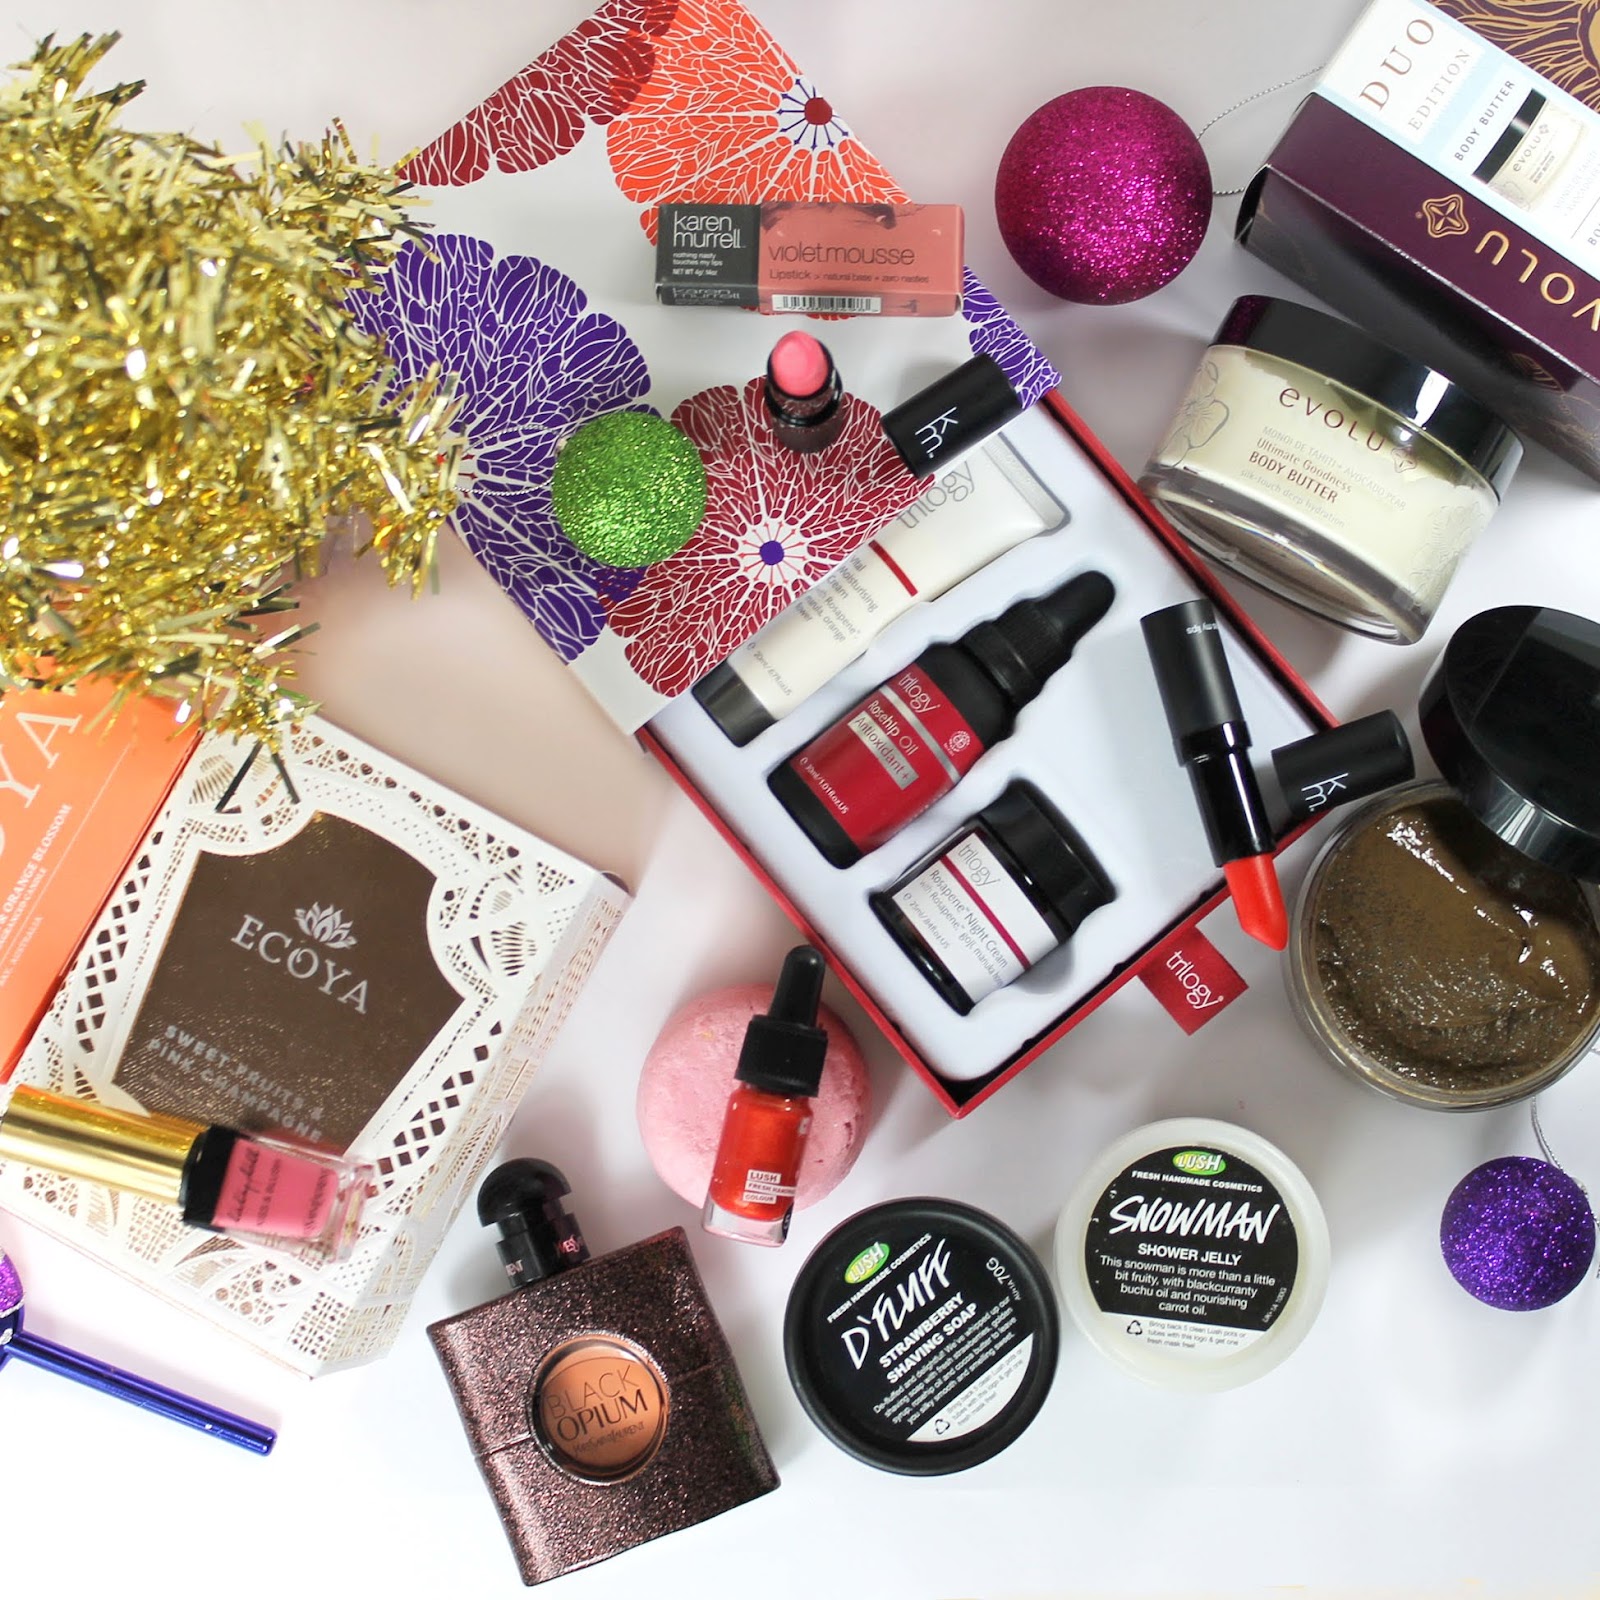 Mums Holiday Gift Guide 2015 - Lani Loves